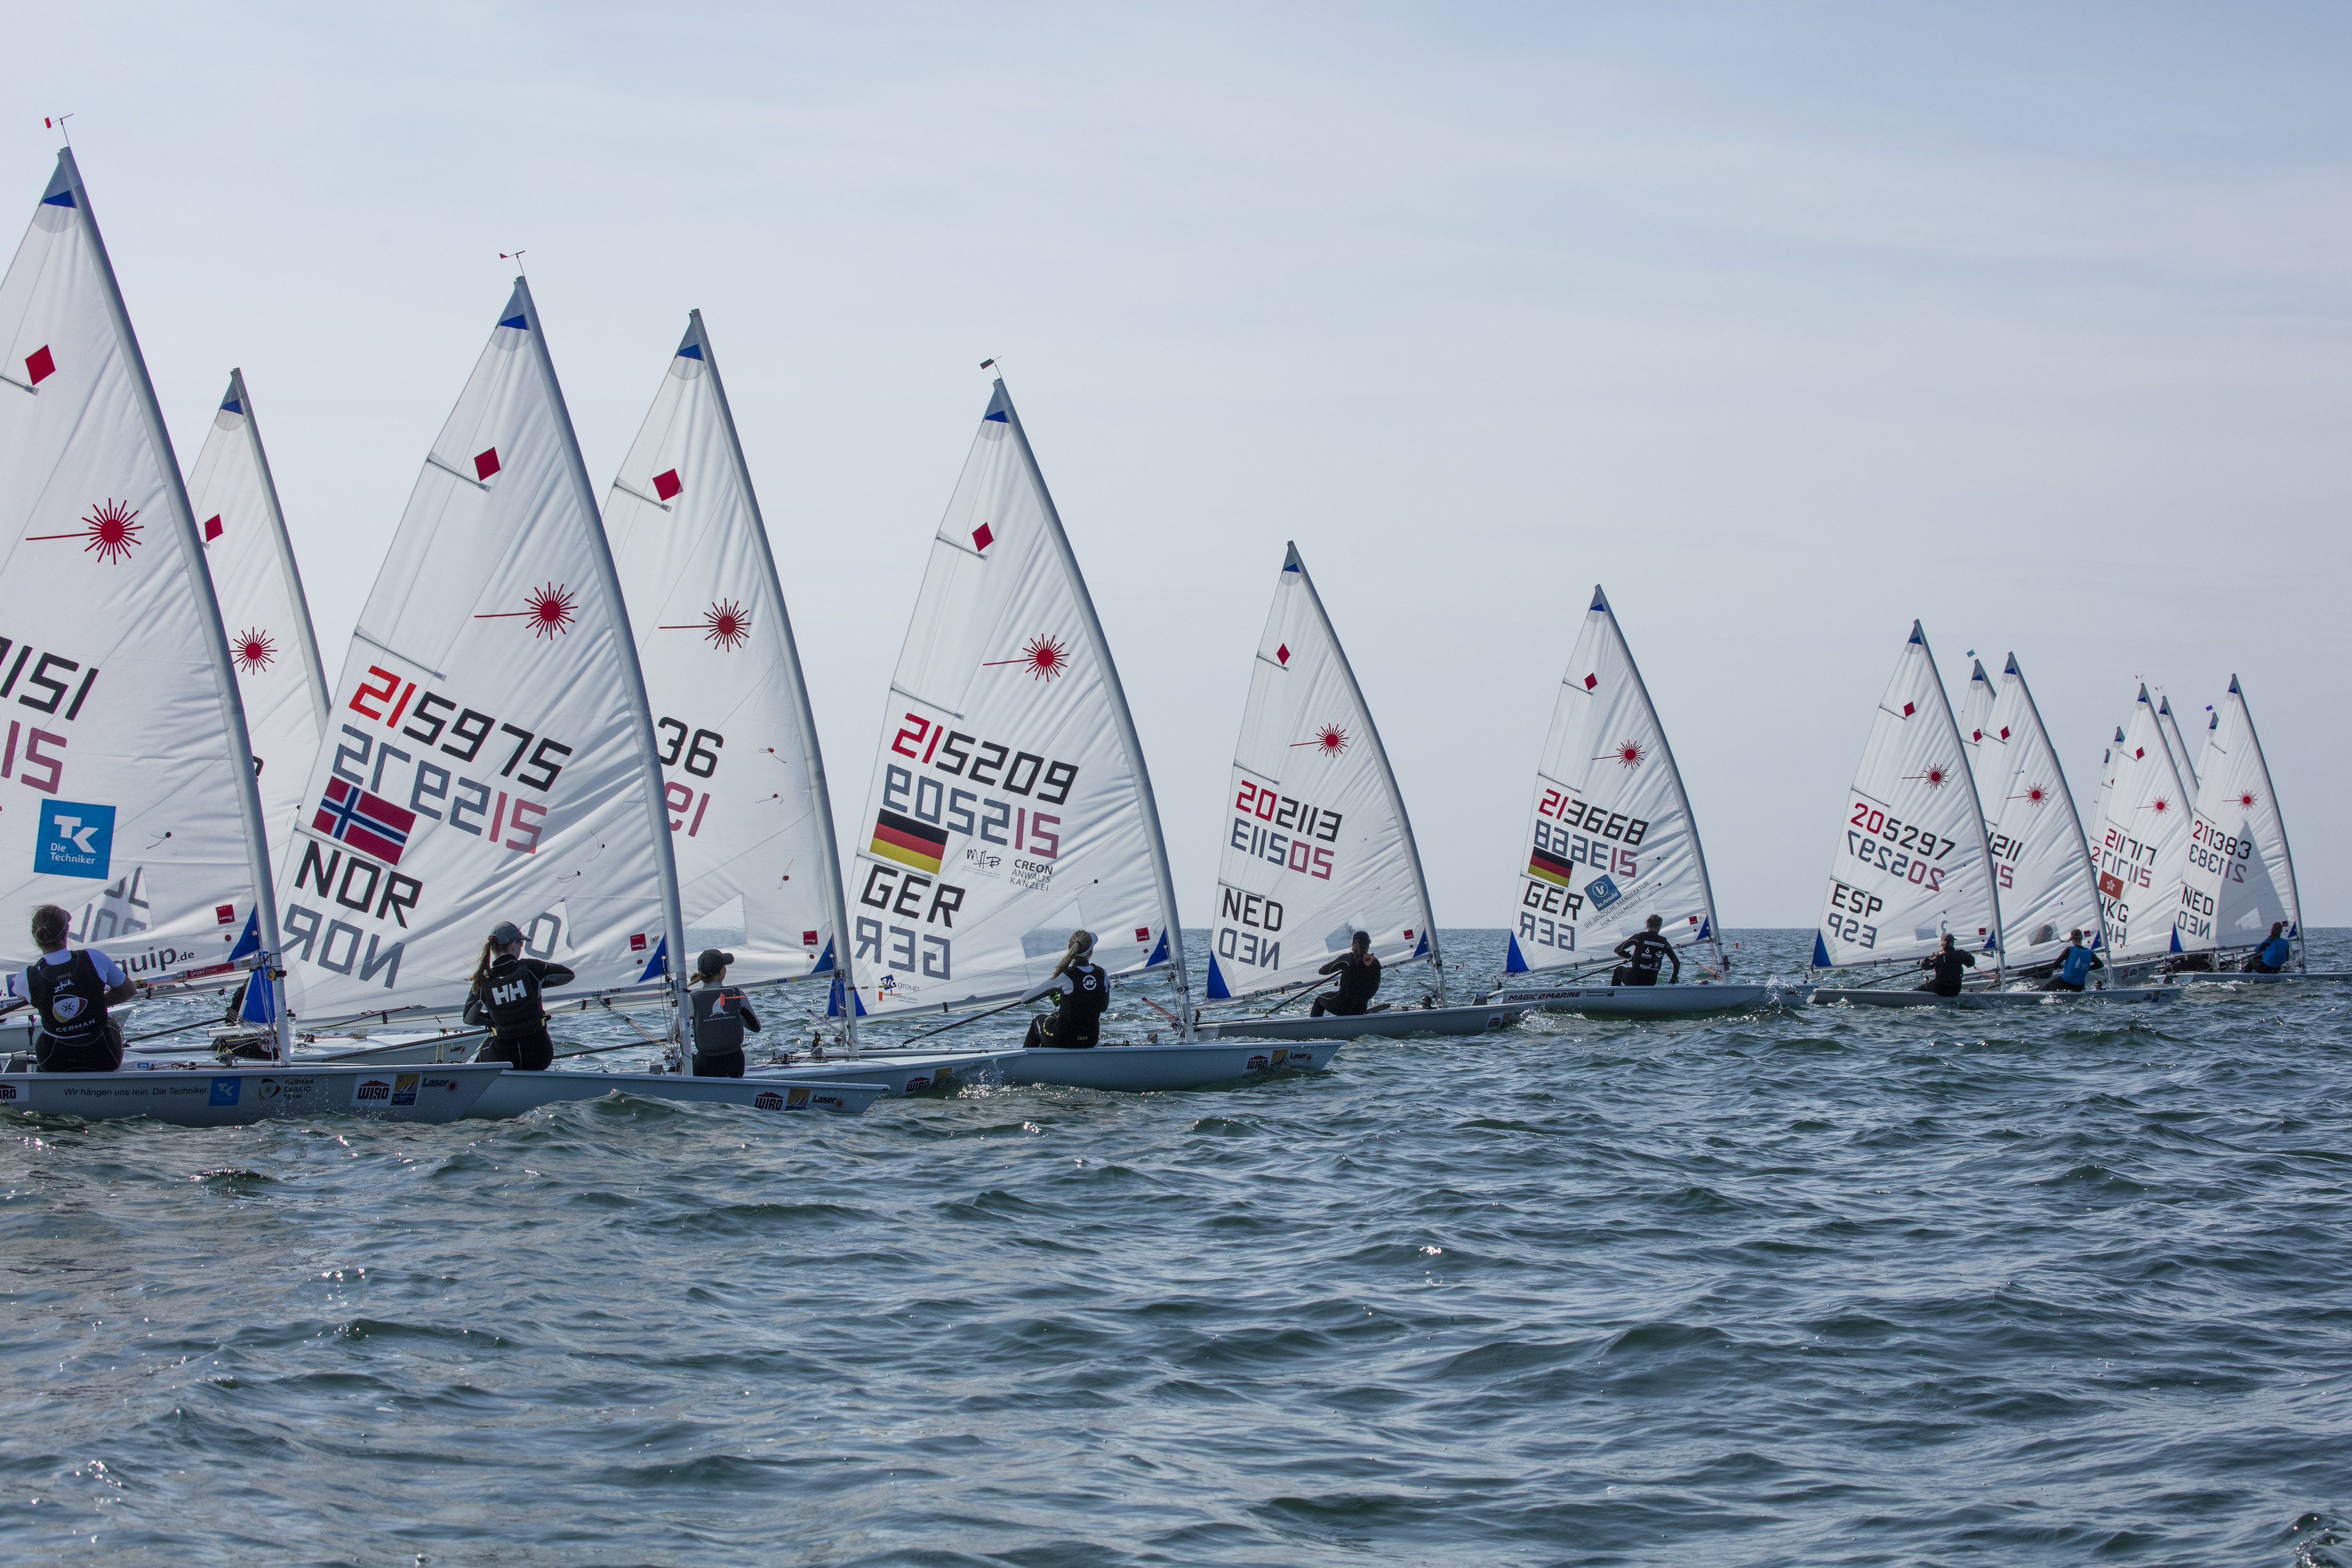  Laser  Europacup 2019  Warnemuende GER  Day 1, with 210 boats racing, Oertling MEX 4th Radial